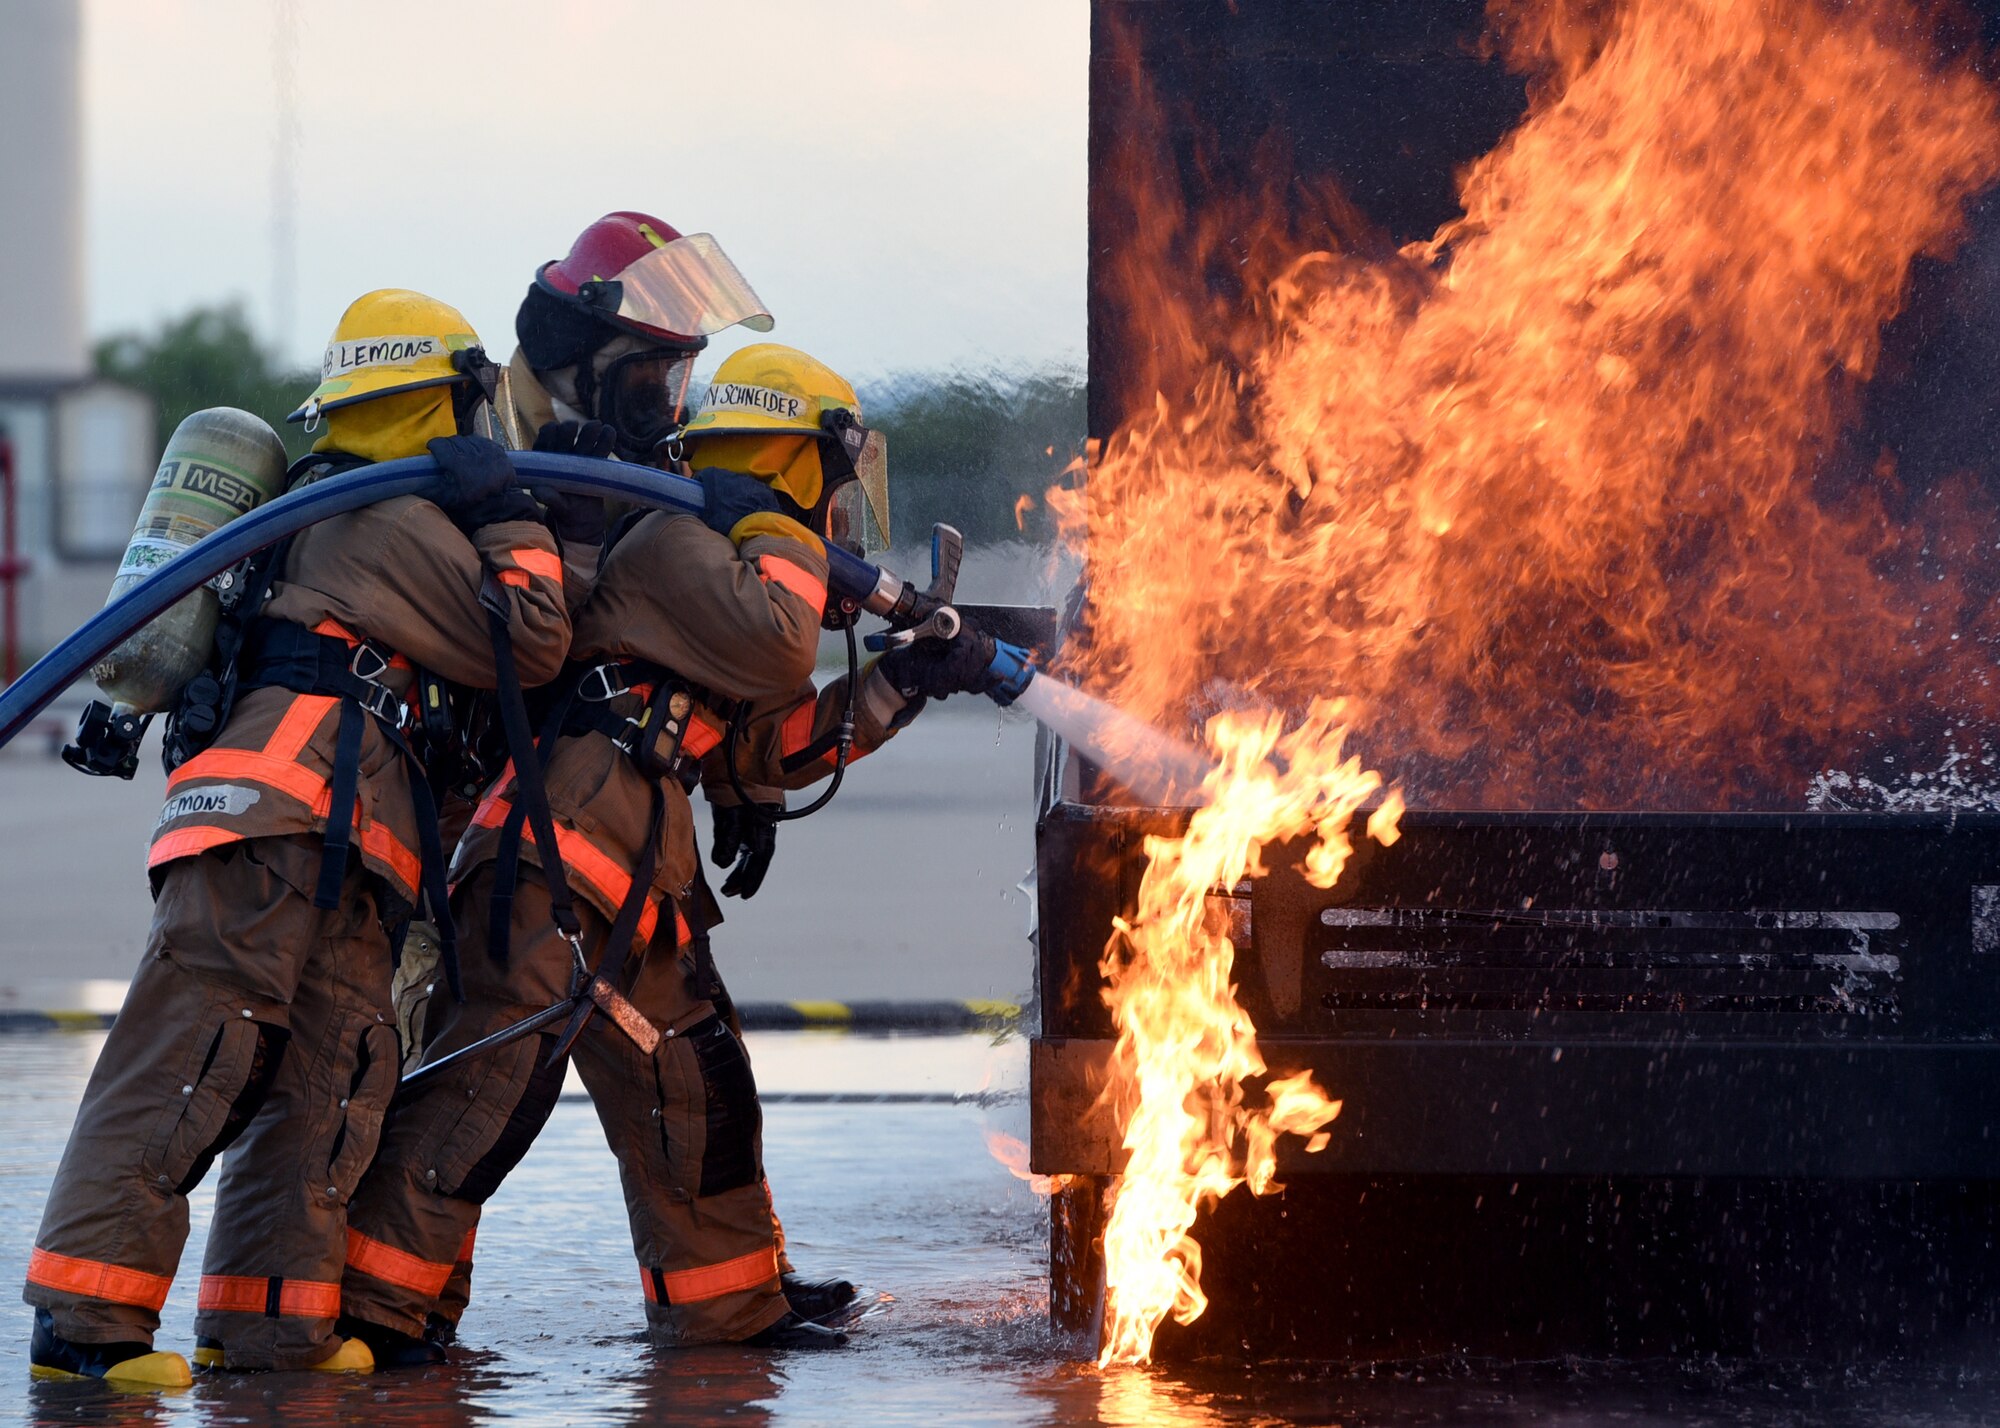 U.S. Air Force Airman Kristina Schneinder, 312th Training Squadron student, leads Airman Emalie Lemons, 312th TRS student, in a textbook style approach to a mock vehicle fire outside the Louis F. Garland Department of Defense Fire Academy on Goodfellow Air Force Base, Texas, July 11, 2019.  Schneinder and Lemons were trained in the classroom how to approach a live fire and what angle to spray the water hose for hood and undercarriage fires before their hands on experience. (U.S. Air Force Photo by Airman 1st Class Abbey Rieves/Released)